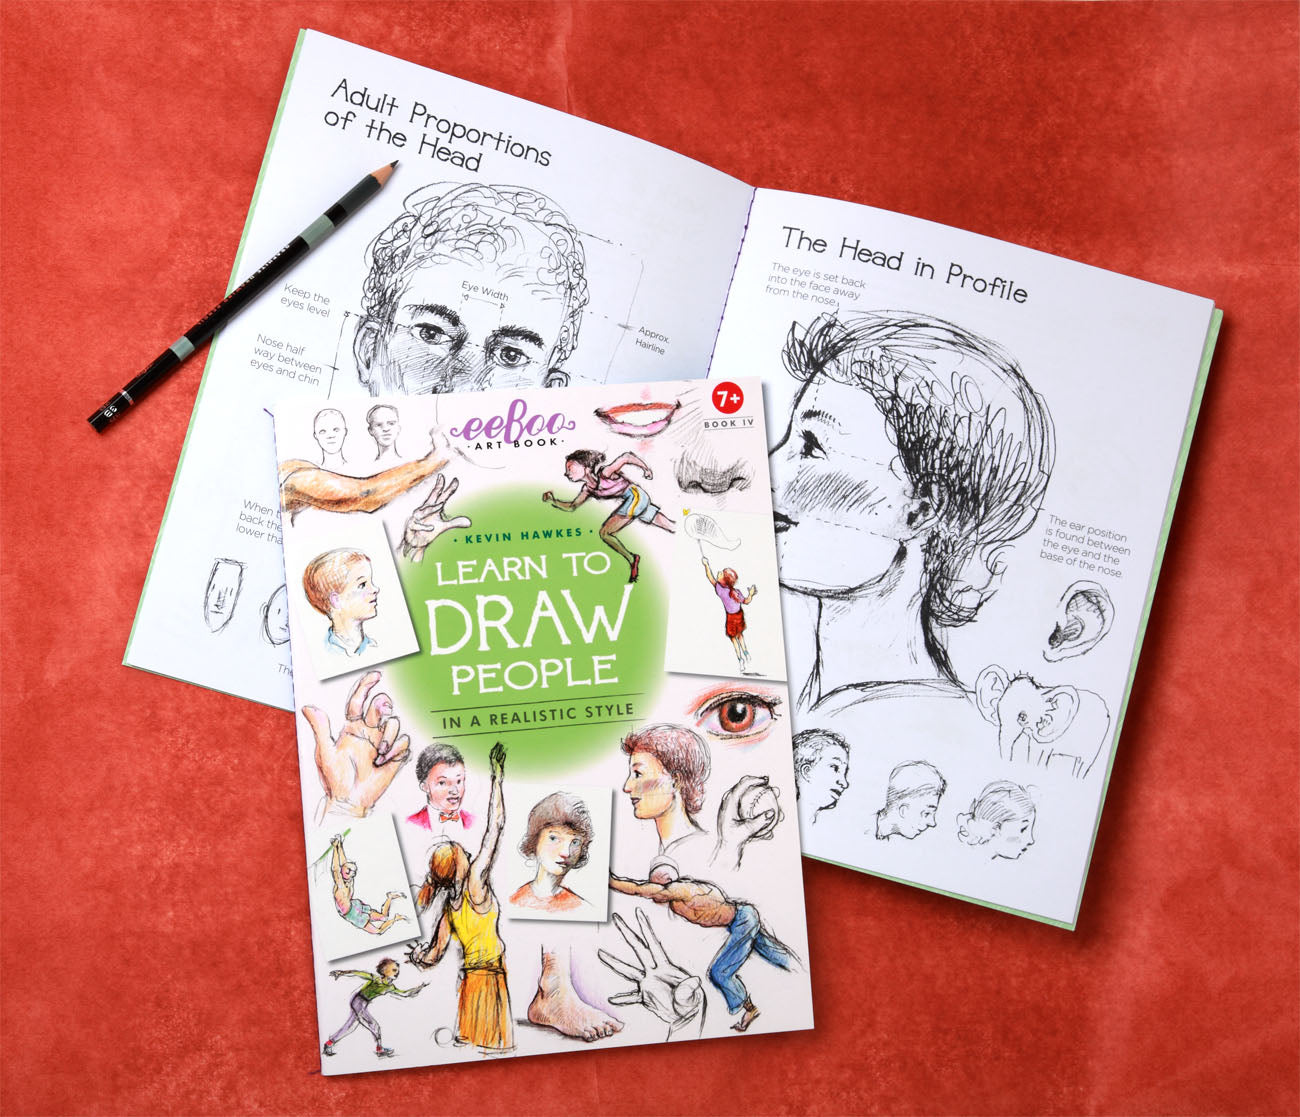 Best Book on Drawing People